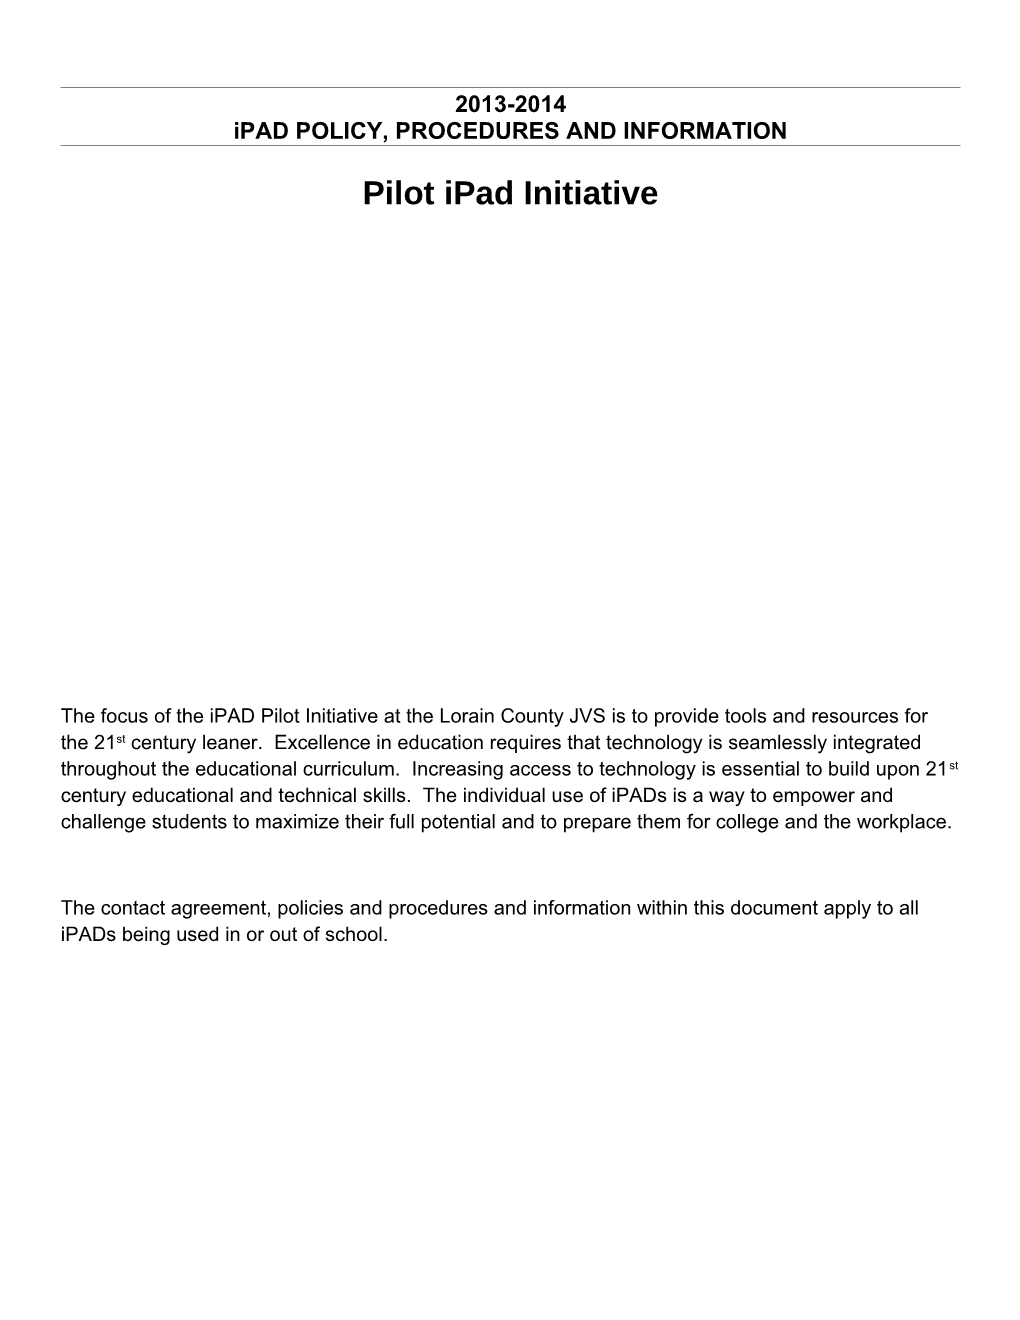 Ipad POLICY, PROCEDURES and INFORMATION